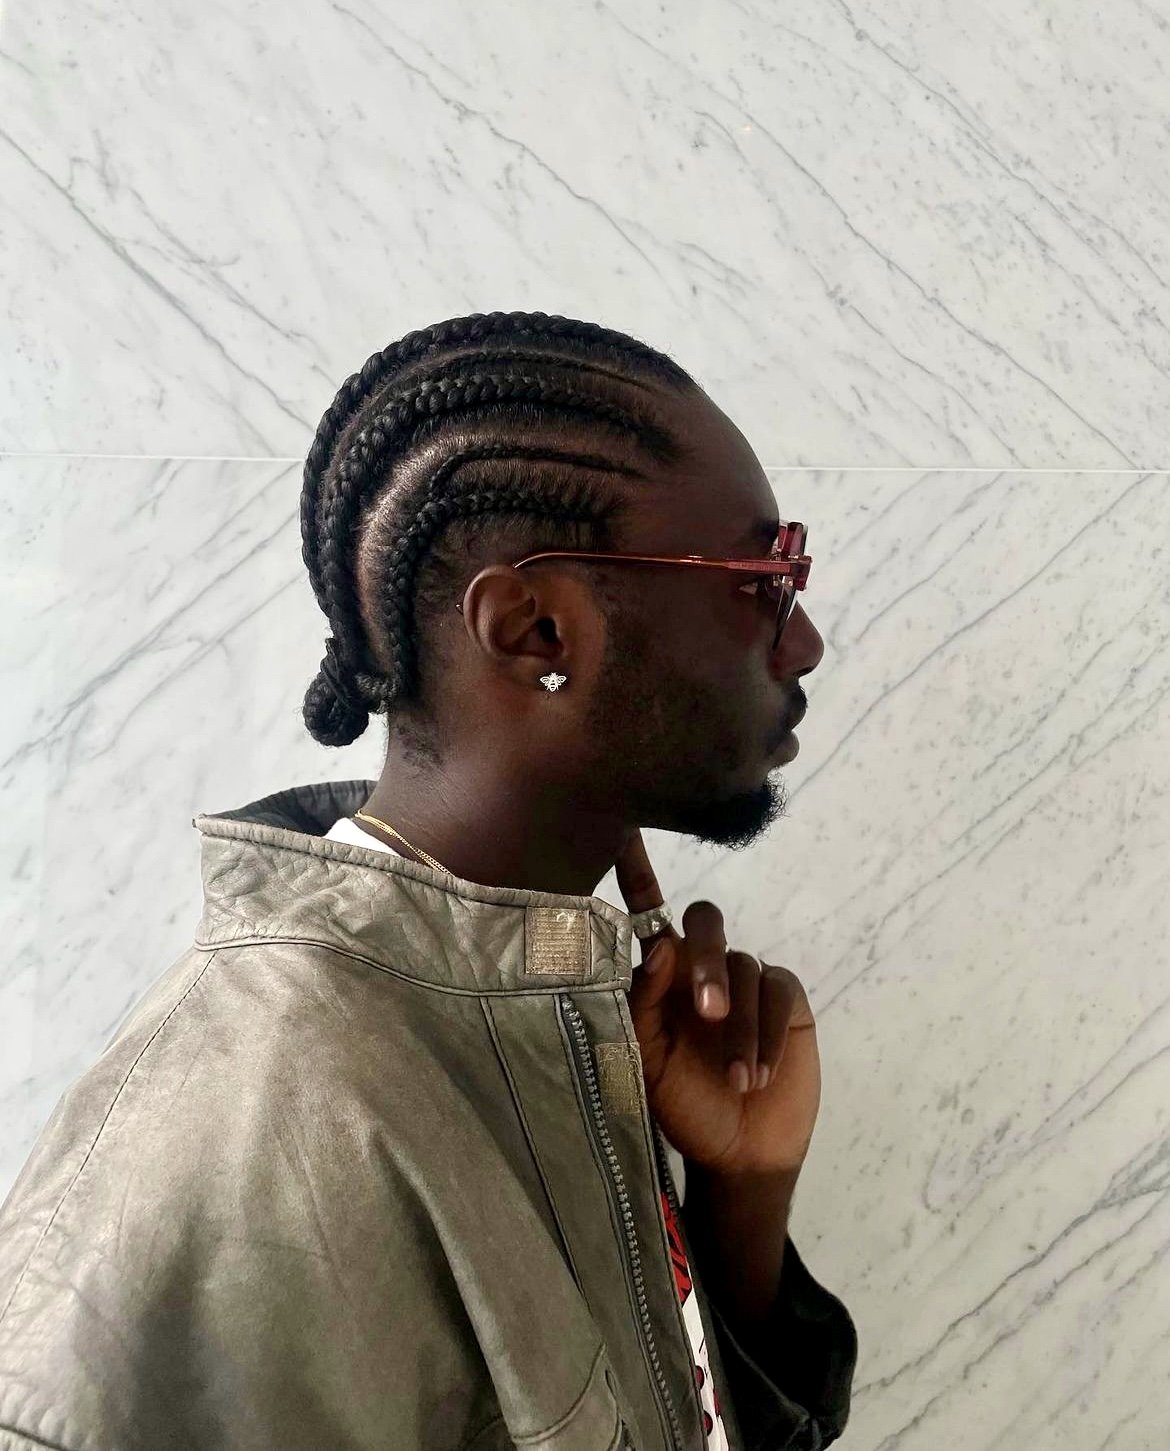 These Viral Louis Vuitton Braids Are Blowing Up on Instagram